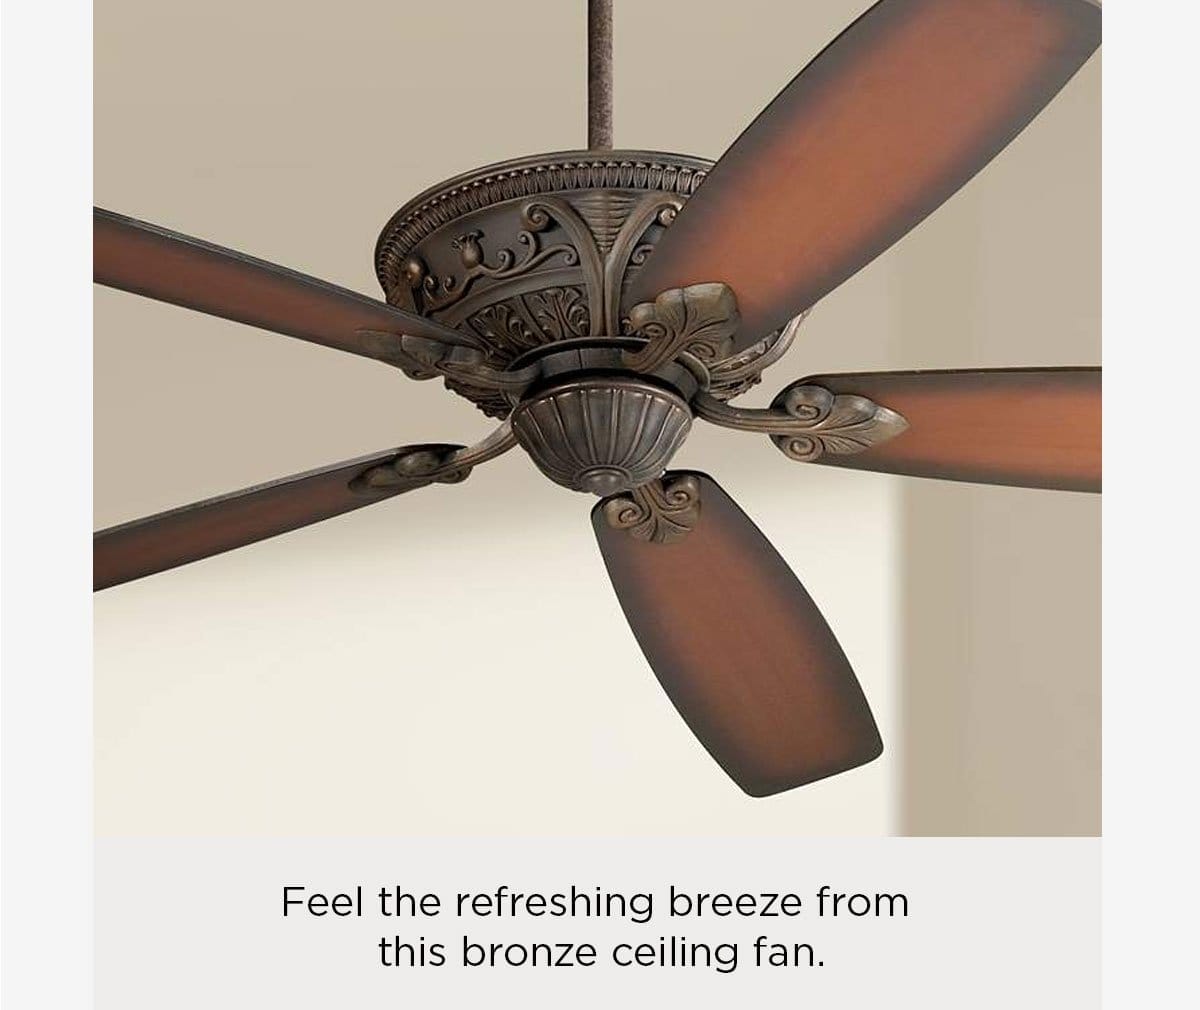 Feel the refreshing breeze from this bronze ceiling fan.